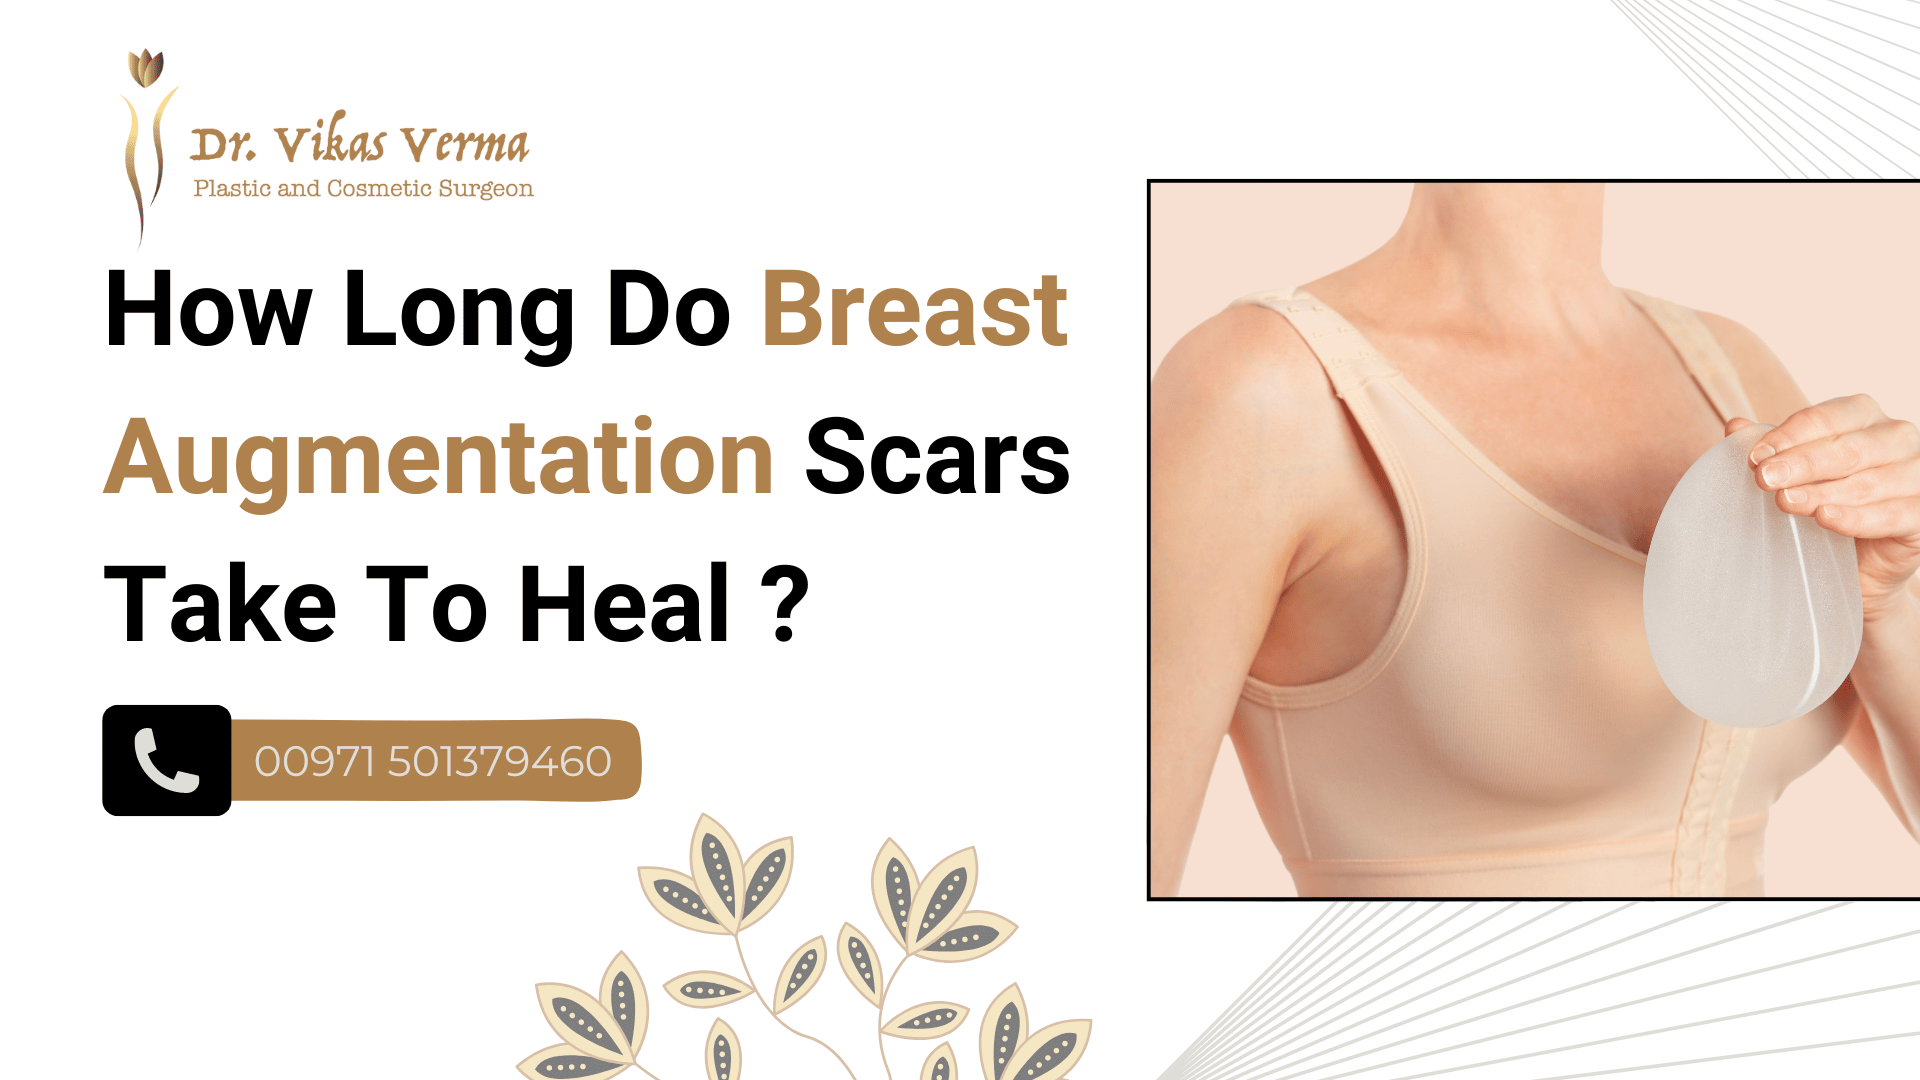 How Long Do Breast Augmentation Scars Take To Heal